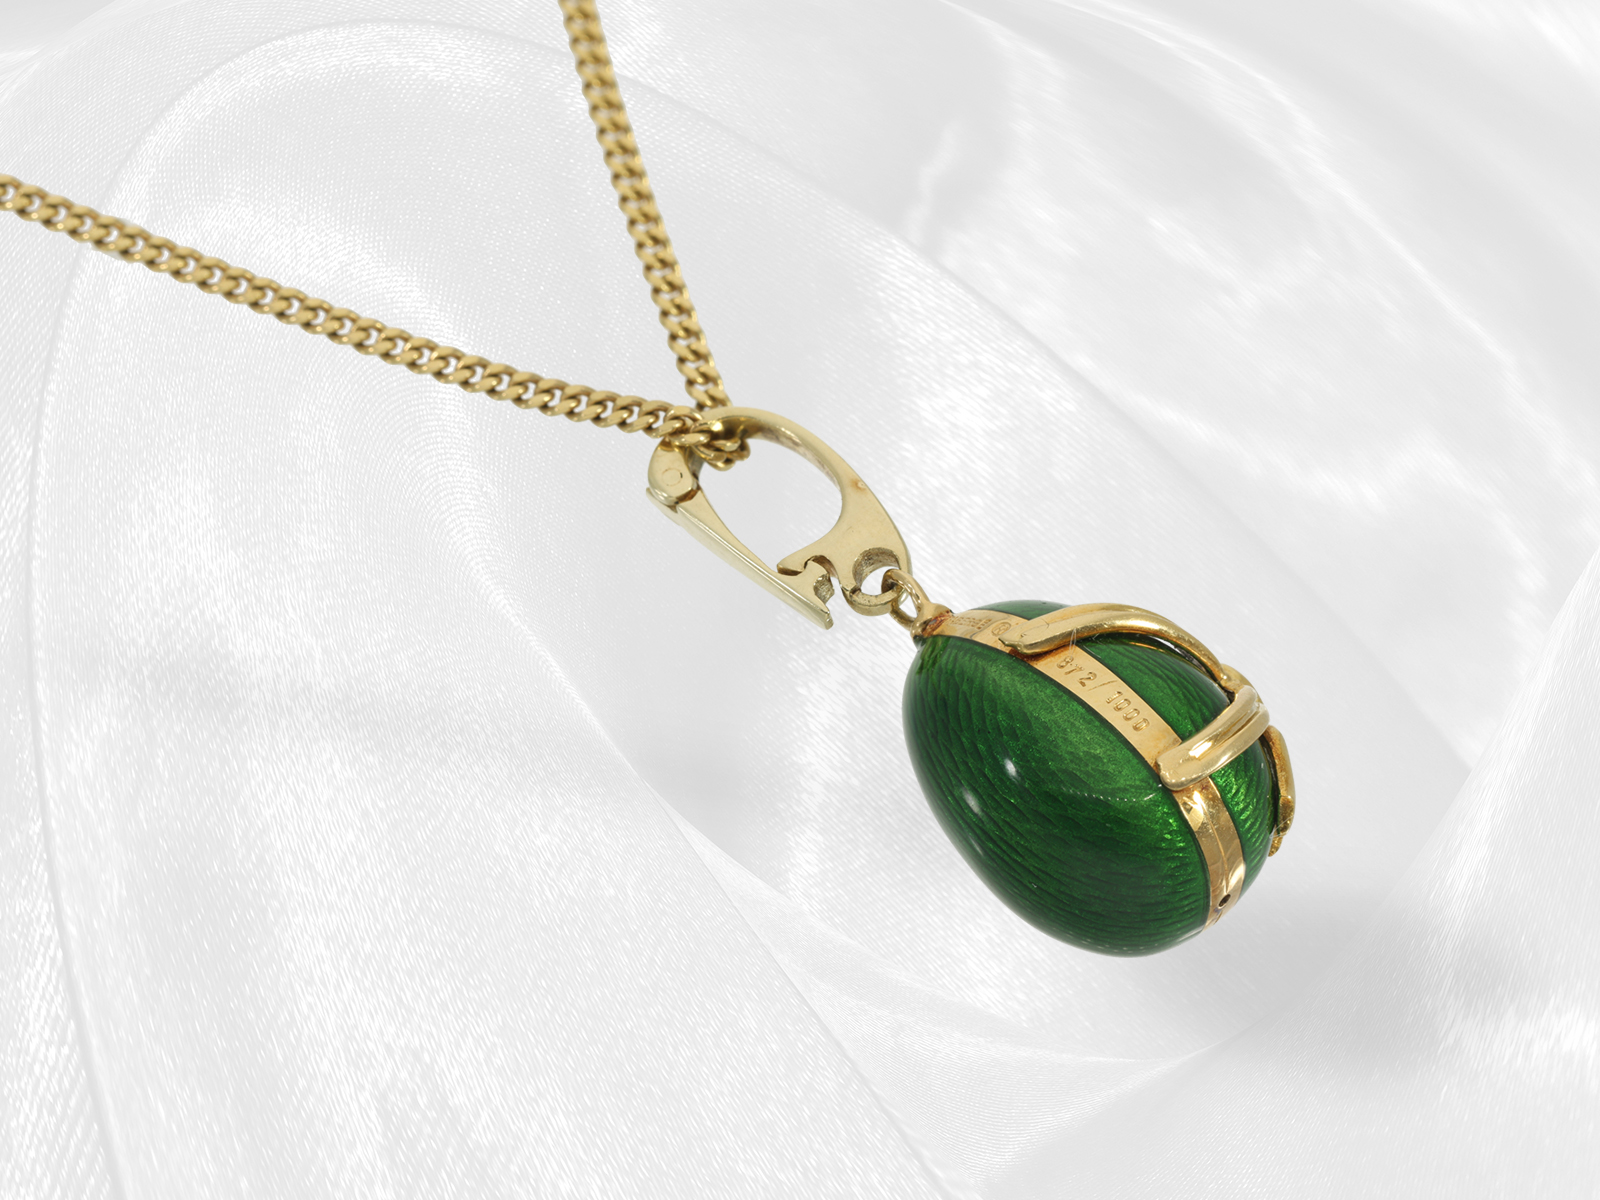 High-quality Fabergé enamel pendant with brilliant-cut diamonds, 18K gold, limited edition, with nec - Image 3 of 12